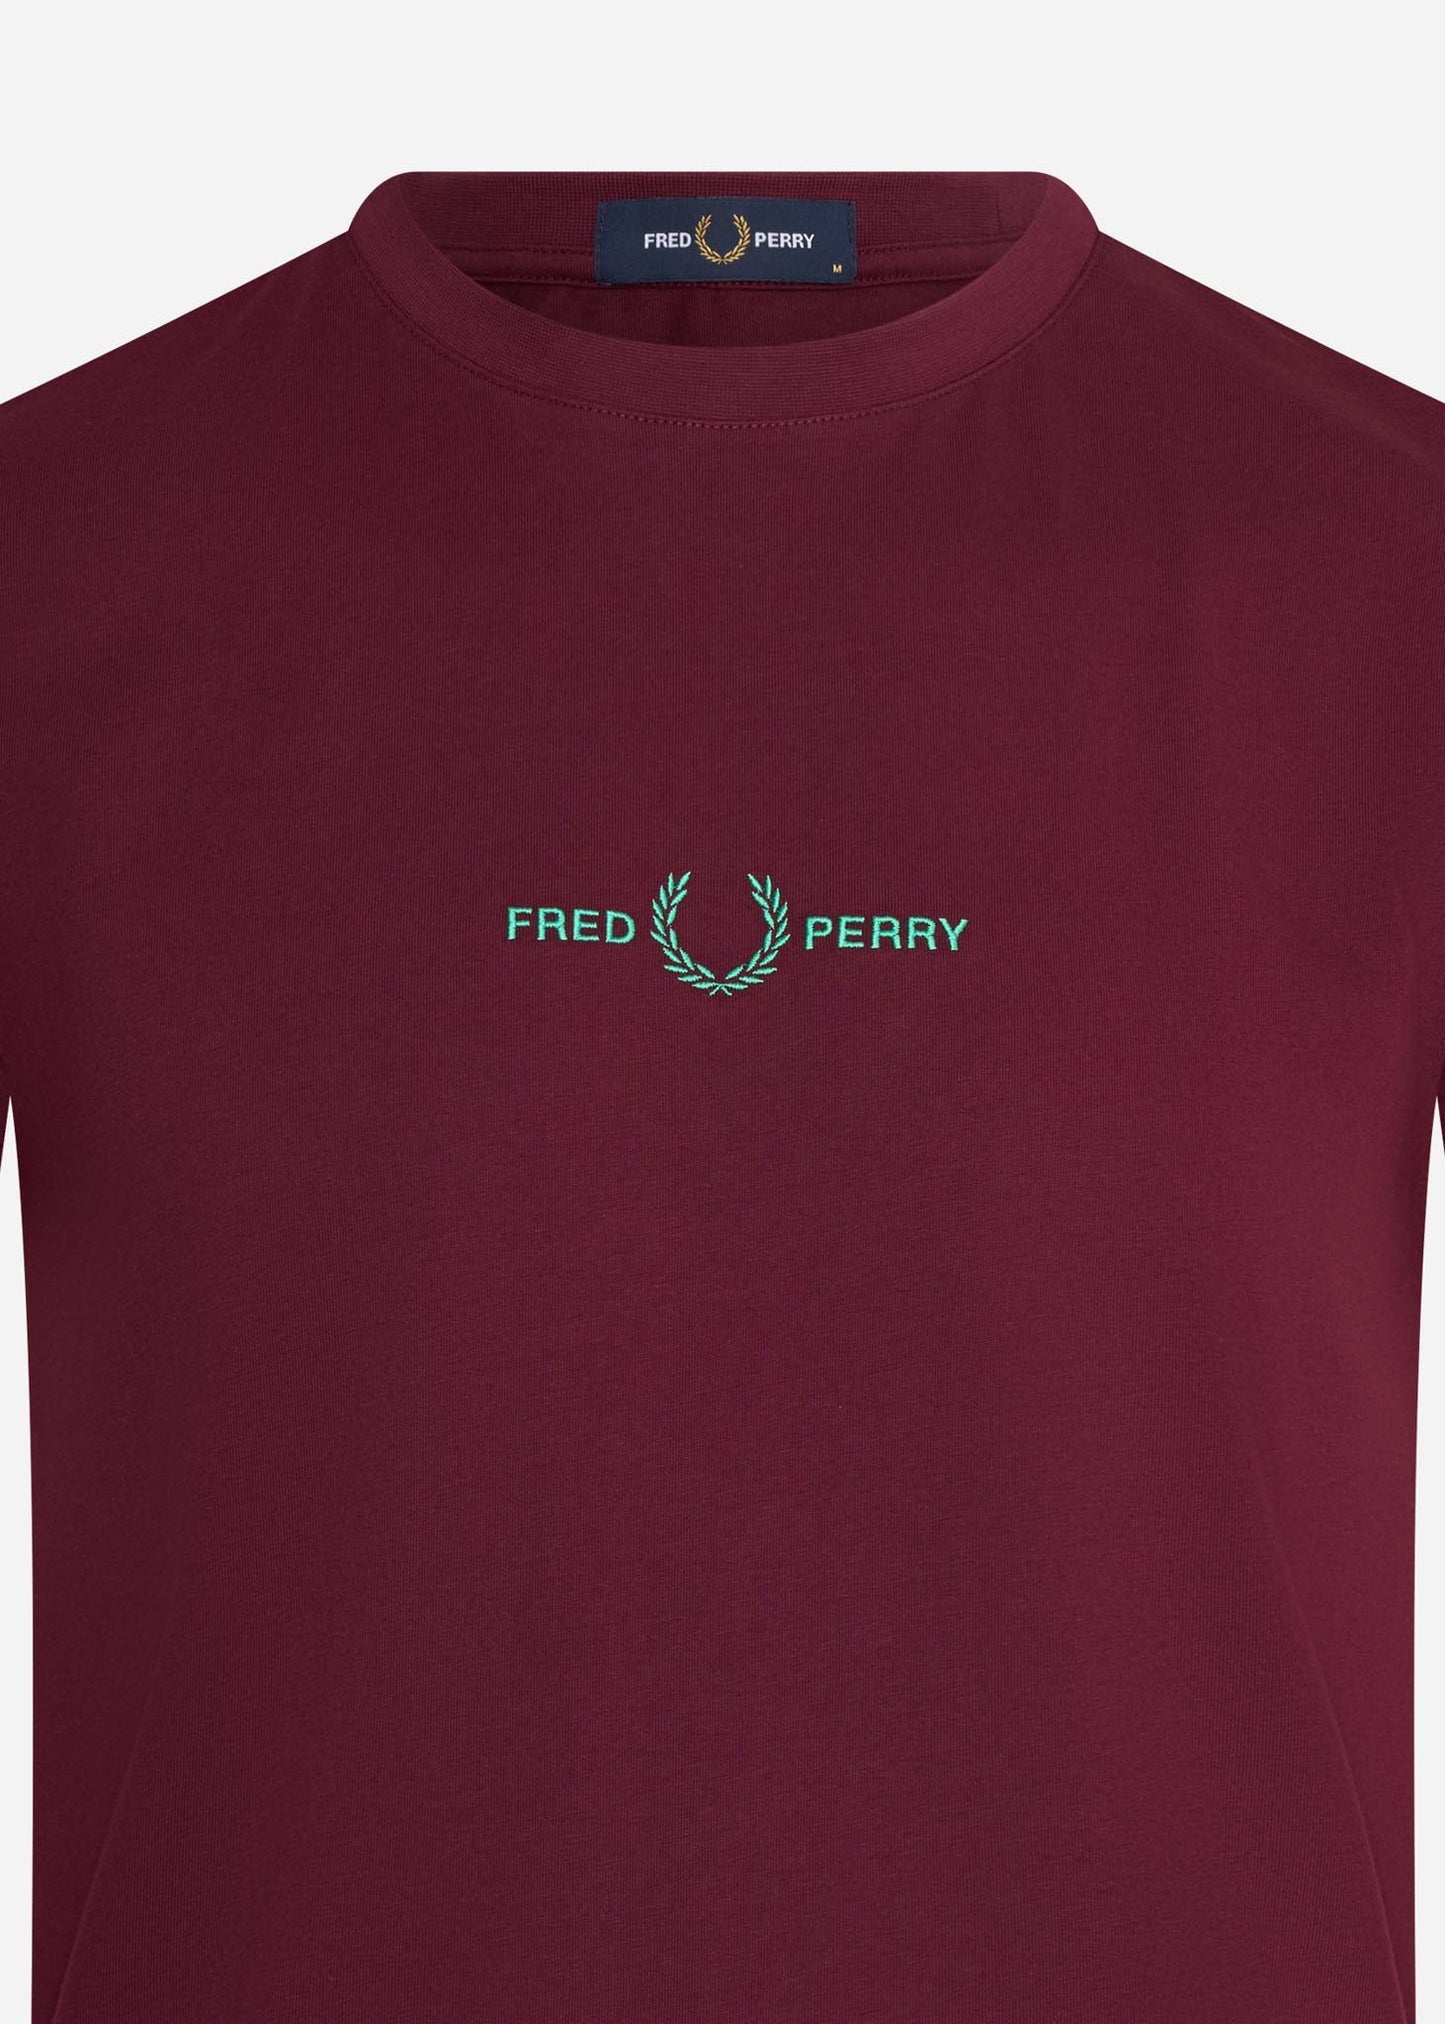 fred perry t-shirt aubergine